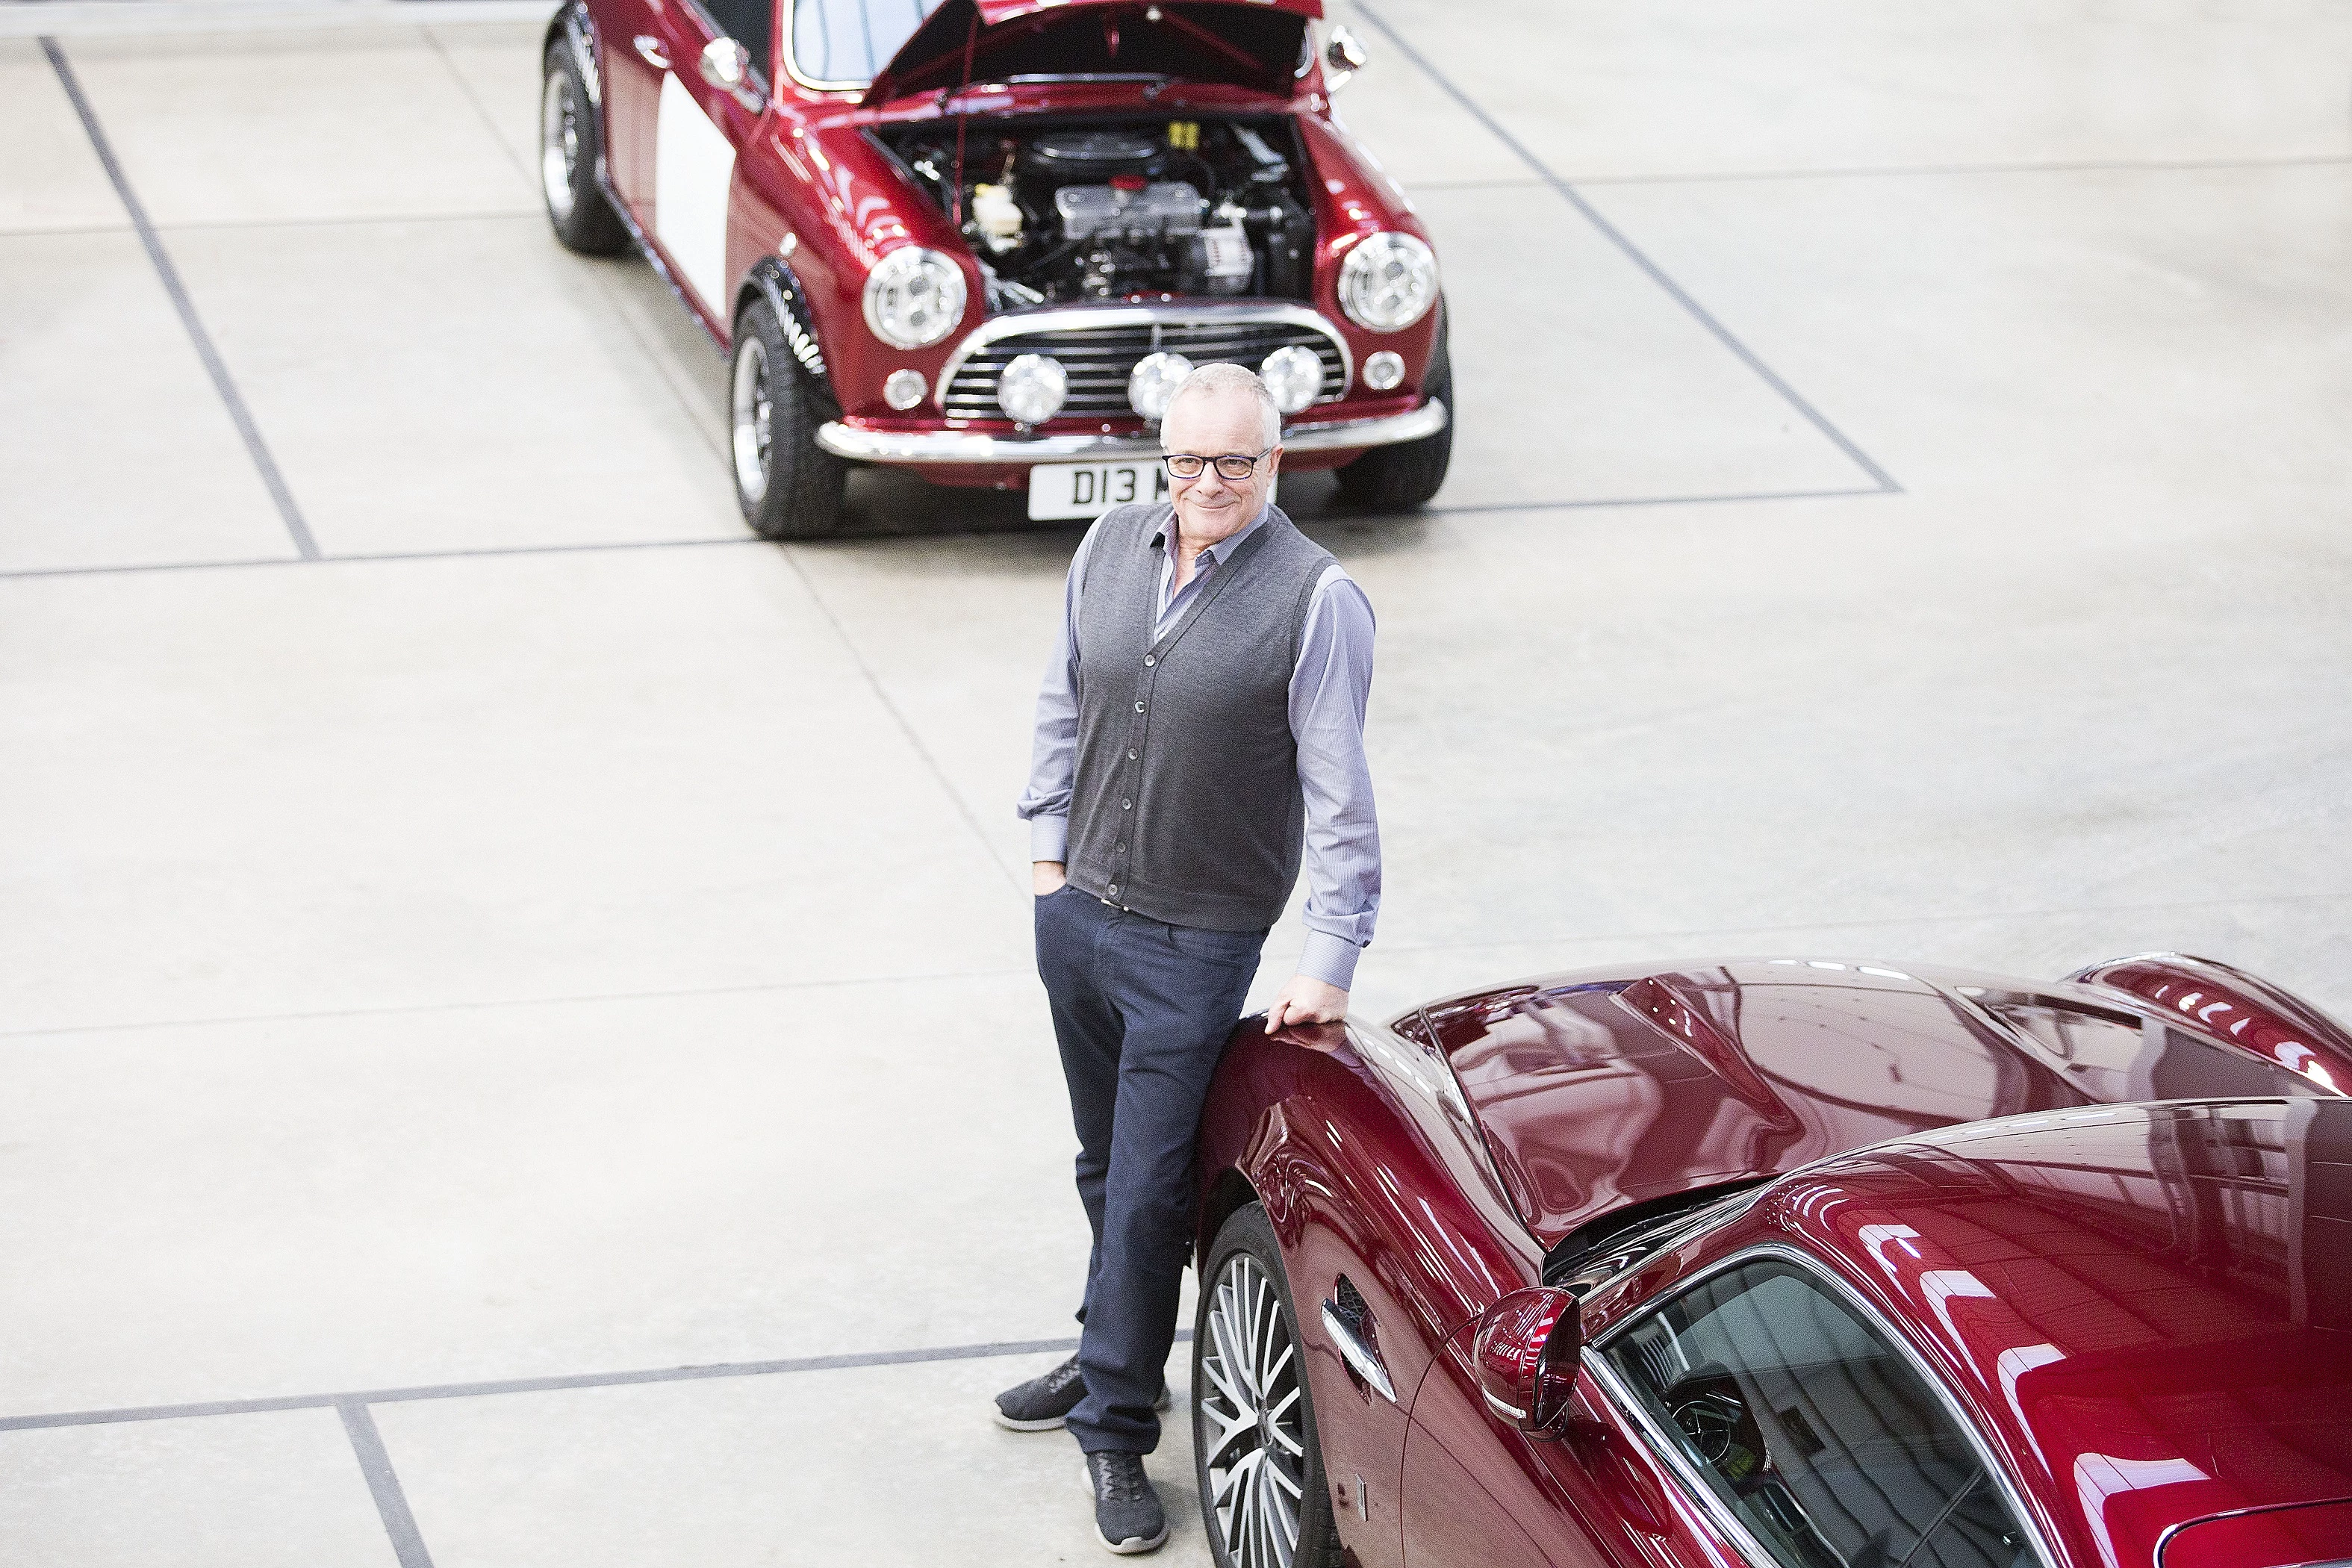 David Brown, founder of David Brown Automotive, which has relocated to Silverstone Park